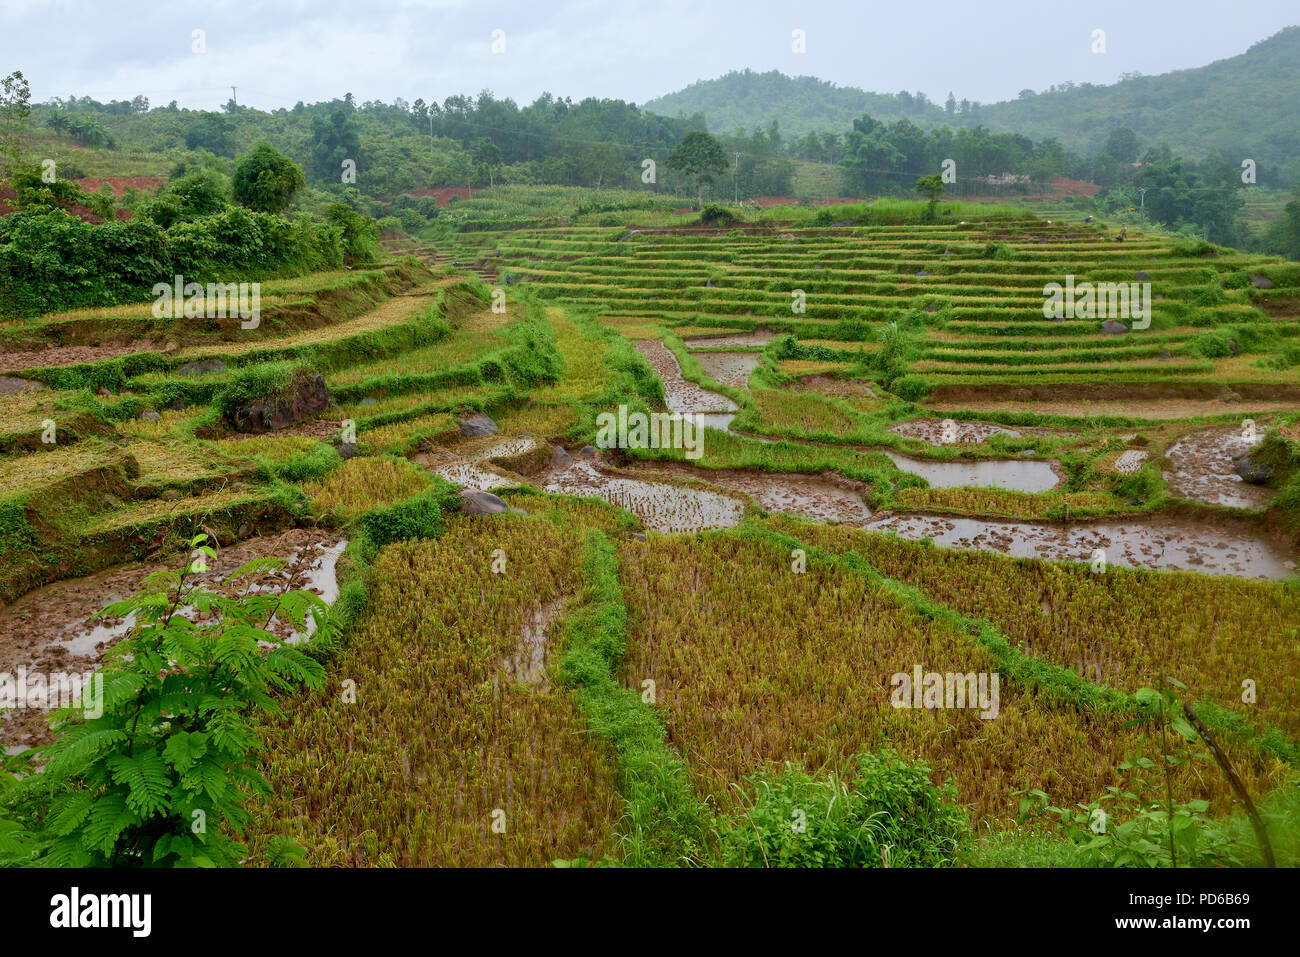 Tightly cropped shot of levelled rice paddies on hillside in Hoa Binh region of North Vietnam. Stock Photo